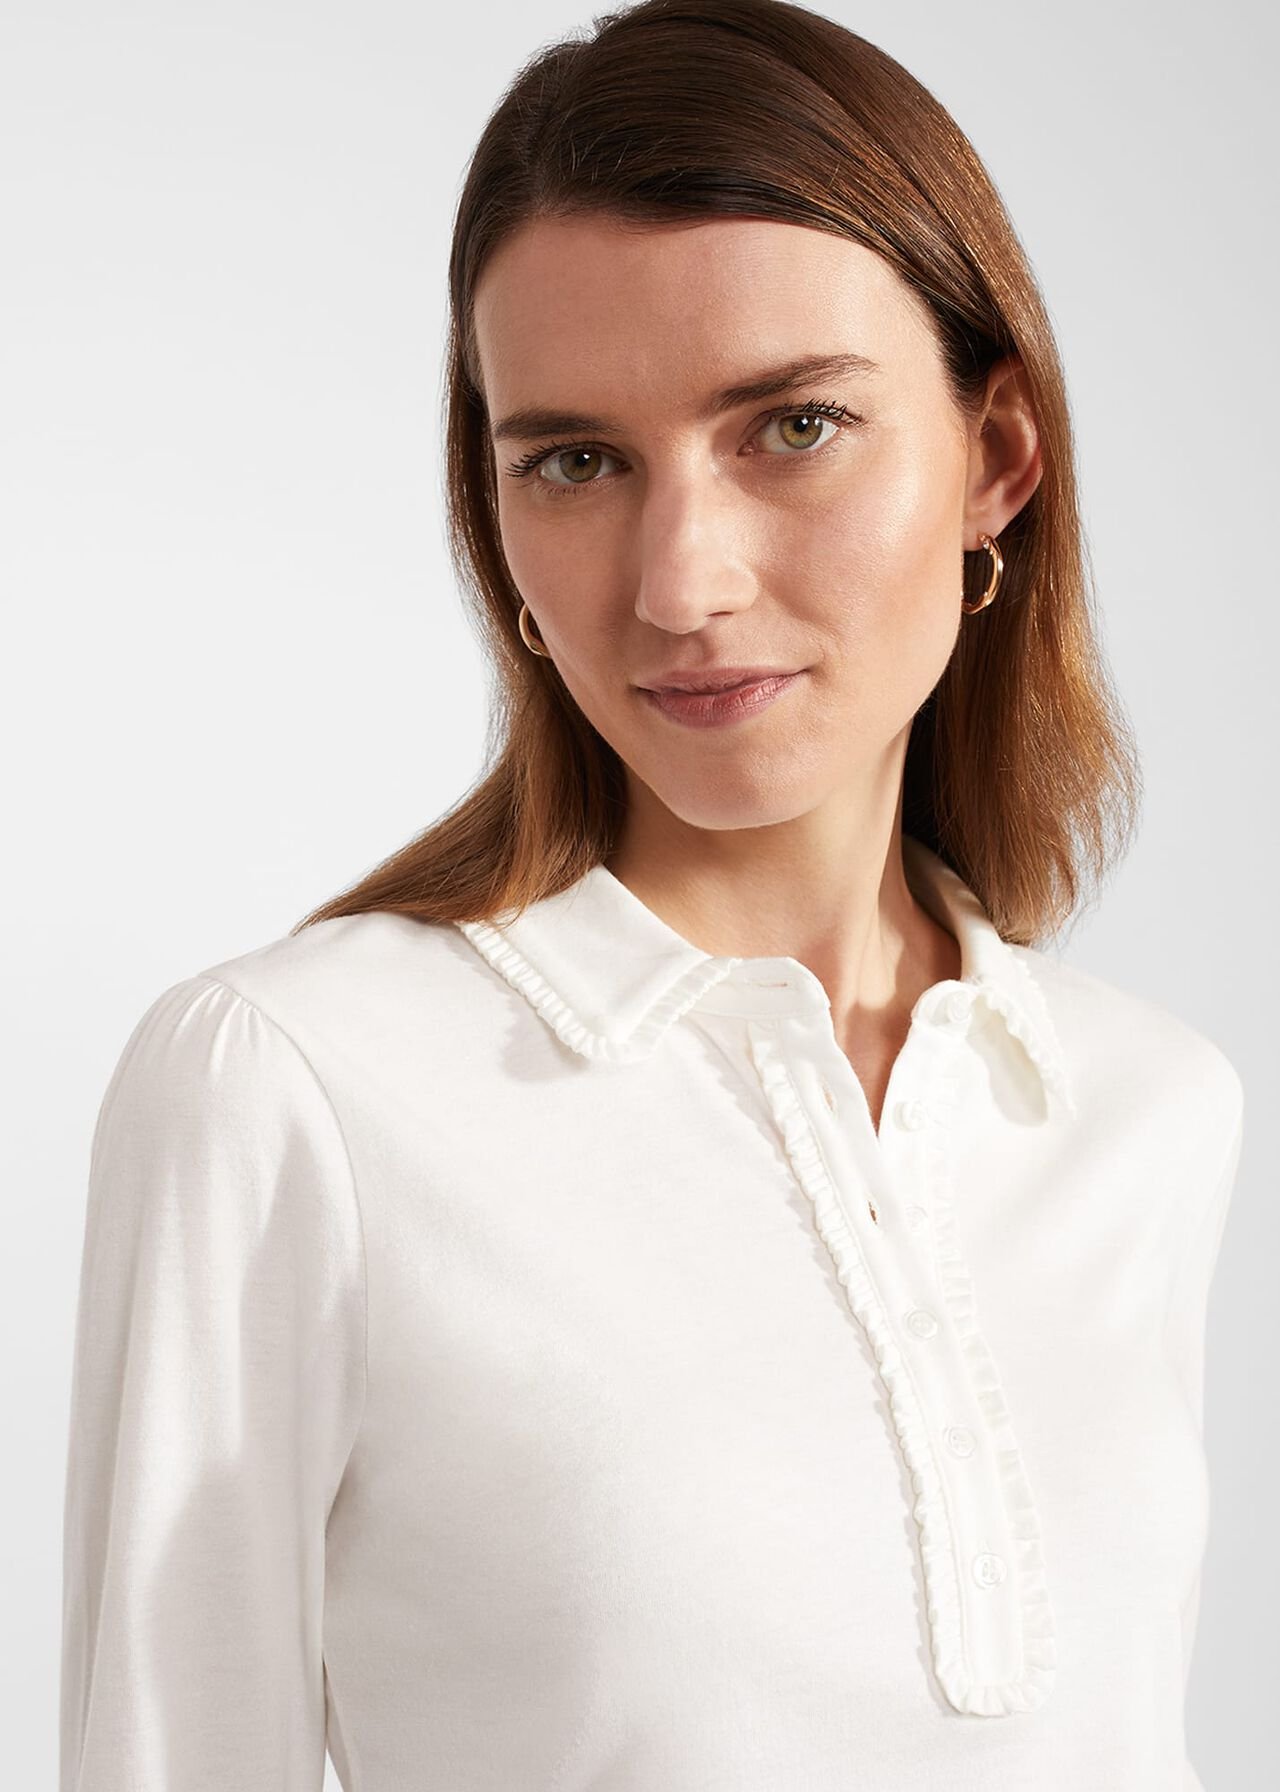 Philippa Cotton Blend Collared Top, Ivory, hi-res